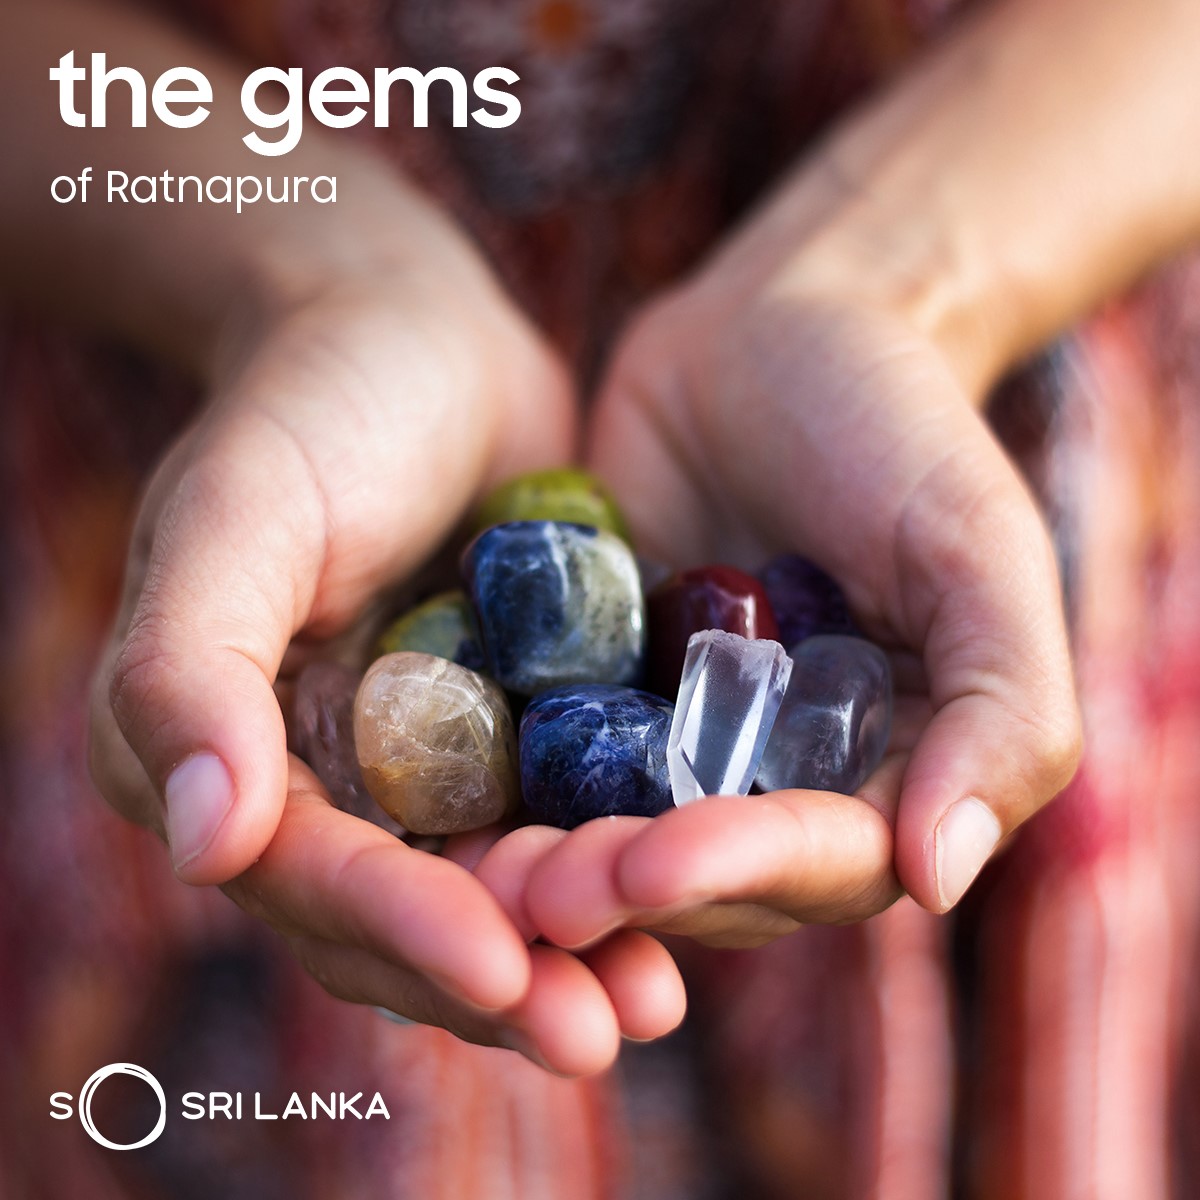 Being on the banks of the Kalu River, Ratnapura has been a gem-mining hotspot for over 2,000 years.